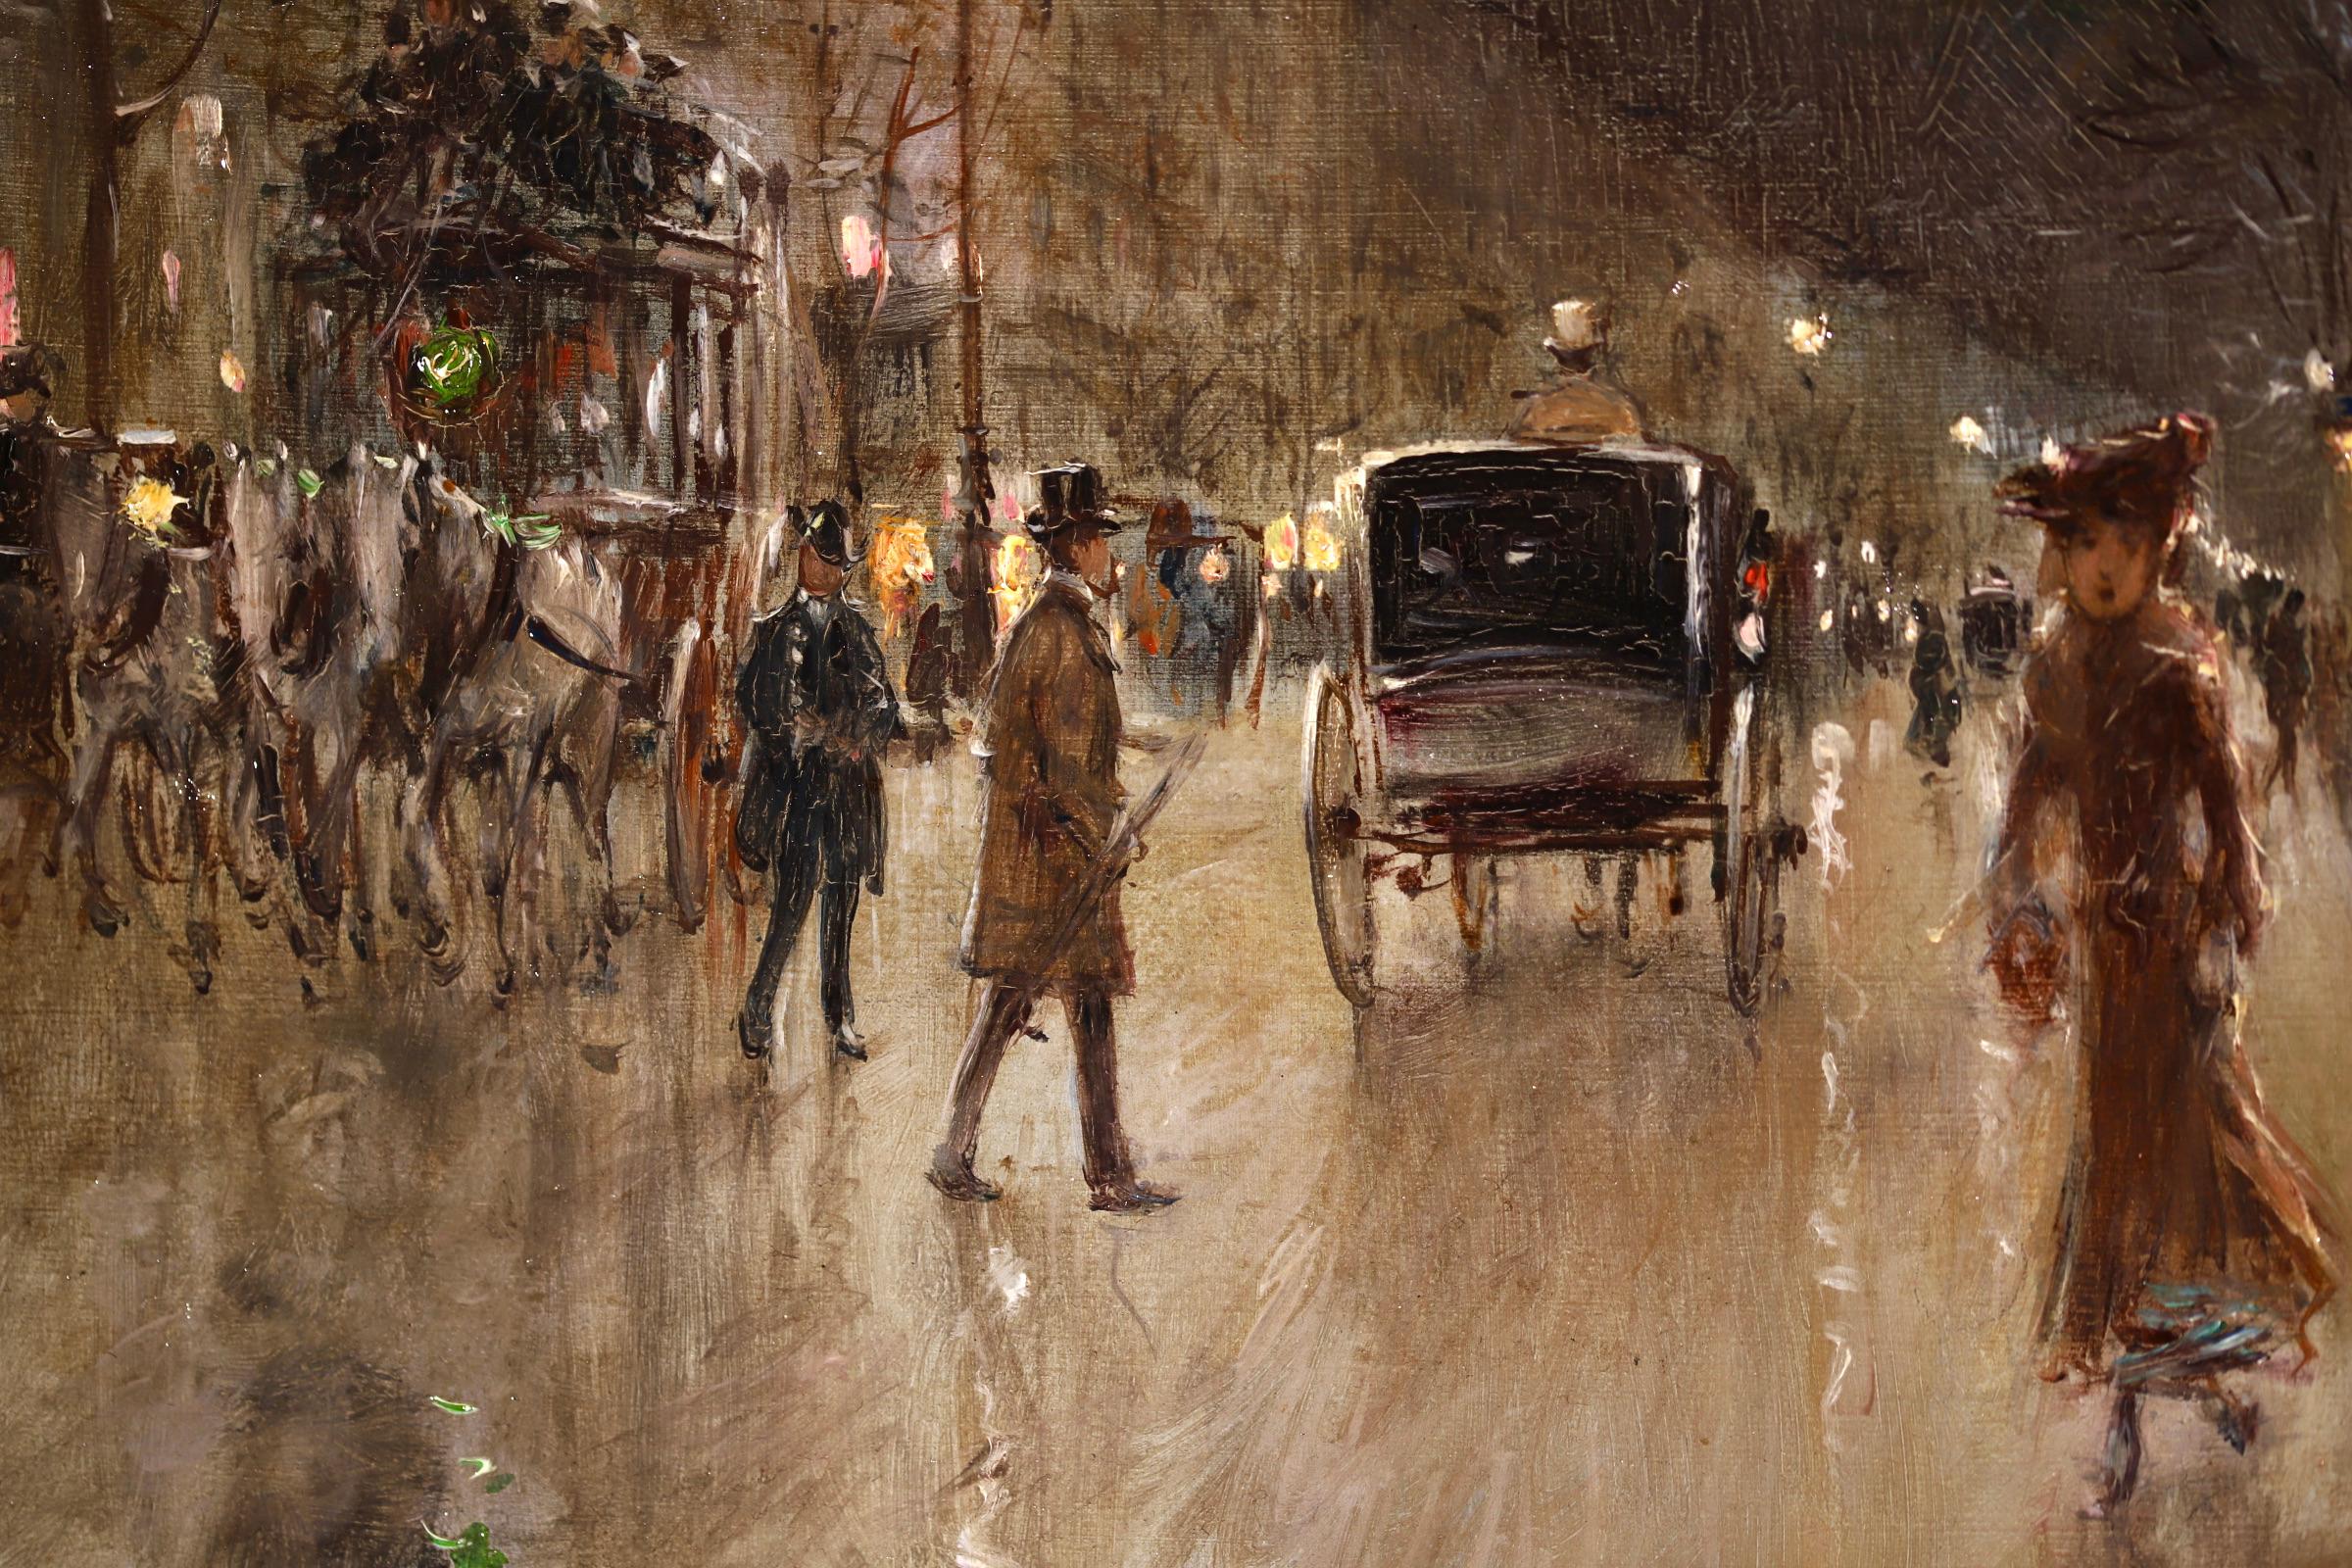 Paris-Grands Boulevards-Moonlight - 19th Century Figures in Cityscape by G Stein - Brown Figurative Painting by Georges Stein